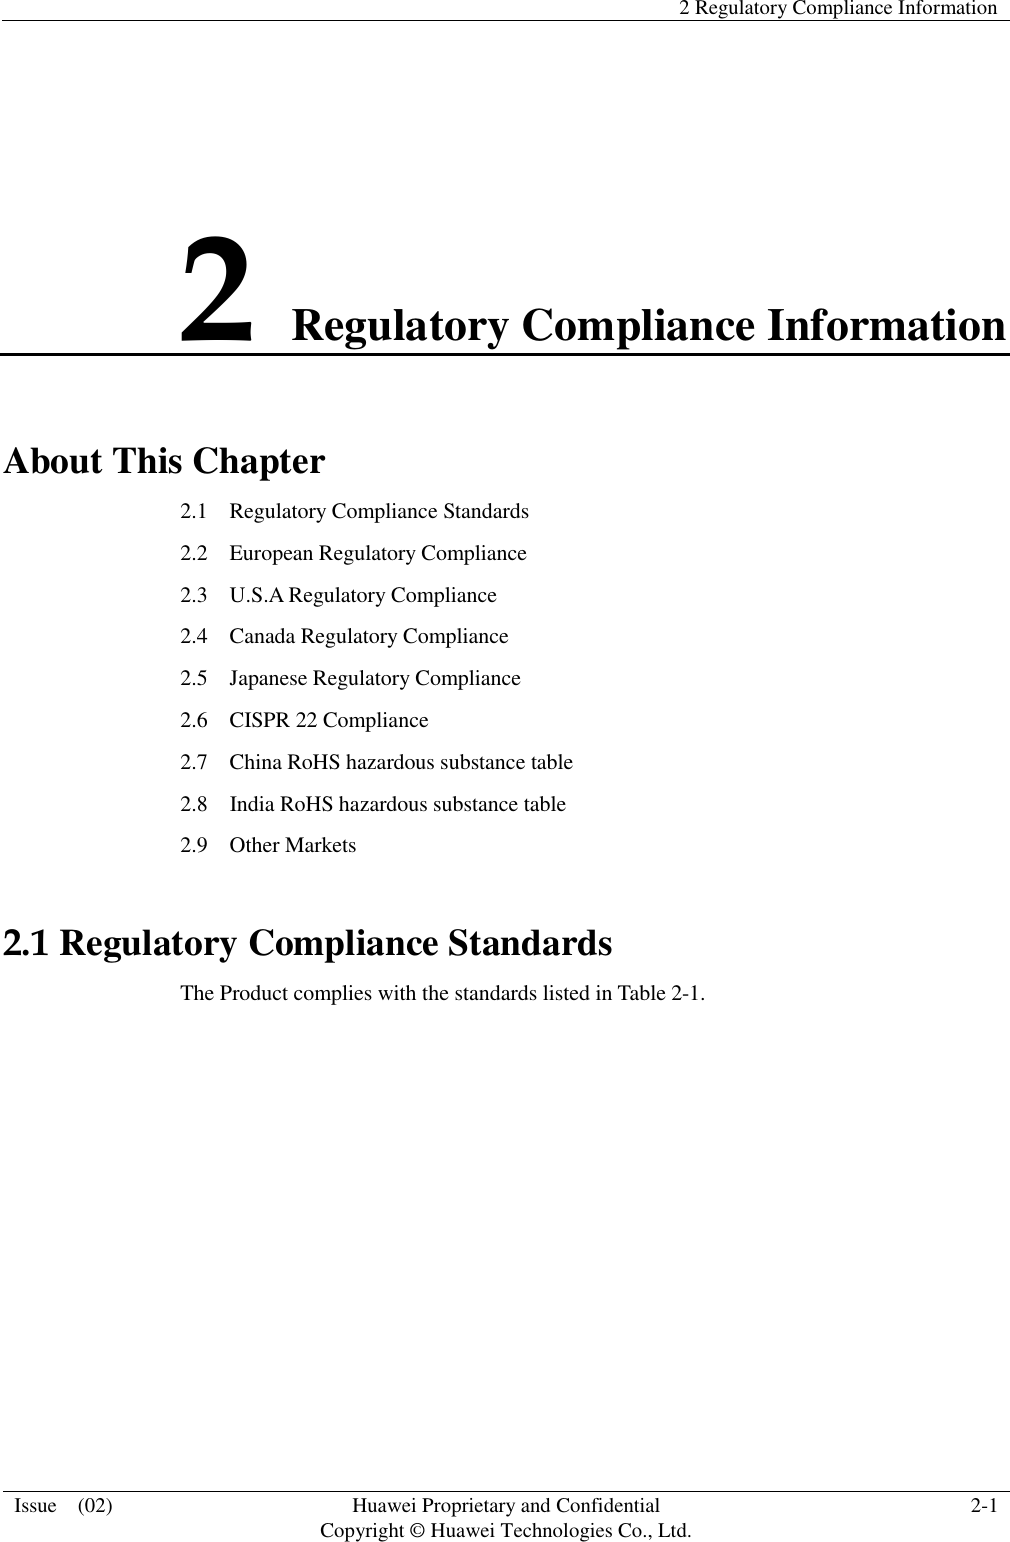   2 Regulatory Compliance Information  Issue    (02) Huawei Proprietary and Confidential                                     Copyright © Huawei Technologies Co., Ltd. 2-1  2 Regulatory Compliance Information About This Chapter 2.1    Regulatory Compliance Standards 2.2    European Regulatory Compliance 2.3    U.S.A Regulatory Compliance                                   2.4  Canada Regulatory Compliance 2.5  Japanese Regulatory Compliance 2.6  CISPR 22 Compliance   2.7  China RoHS hazardous substance table 2.8  India RoHS hazardous substance table 2.9  Other Markets 2.1 Regulatory Compliance Standards The Product complies with the standards listed in Table 2-1. 